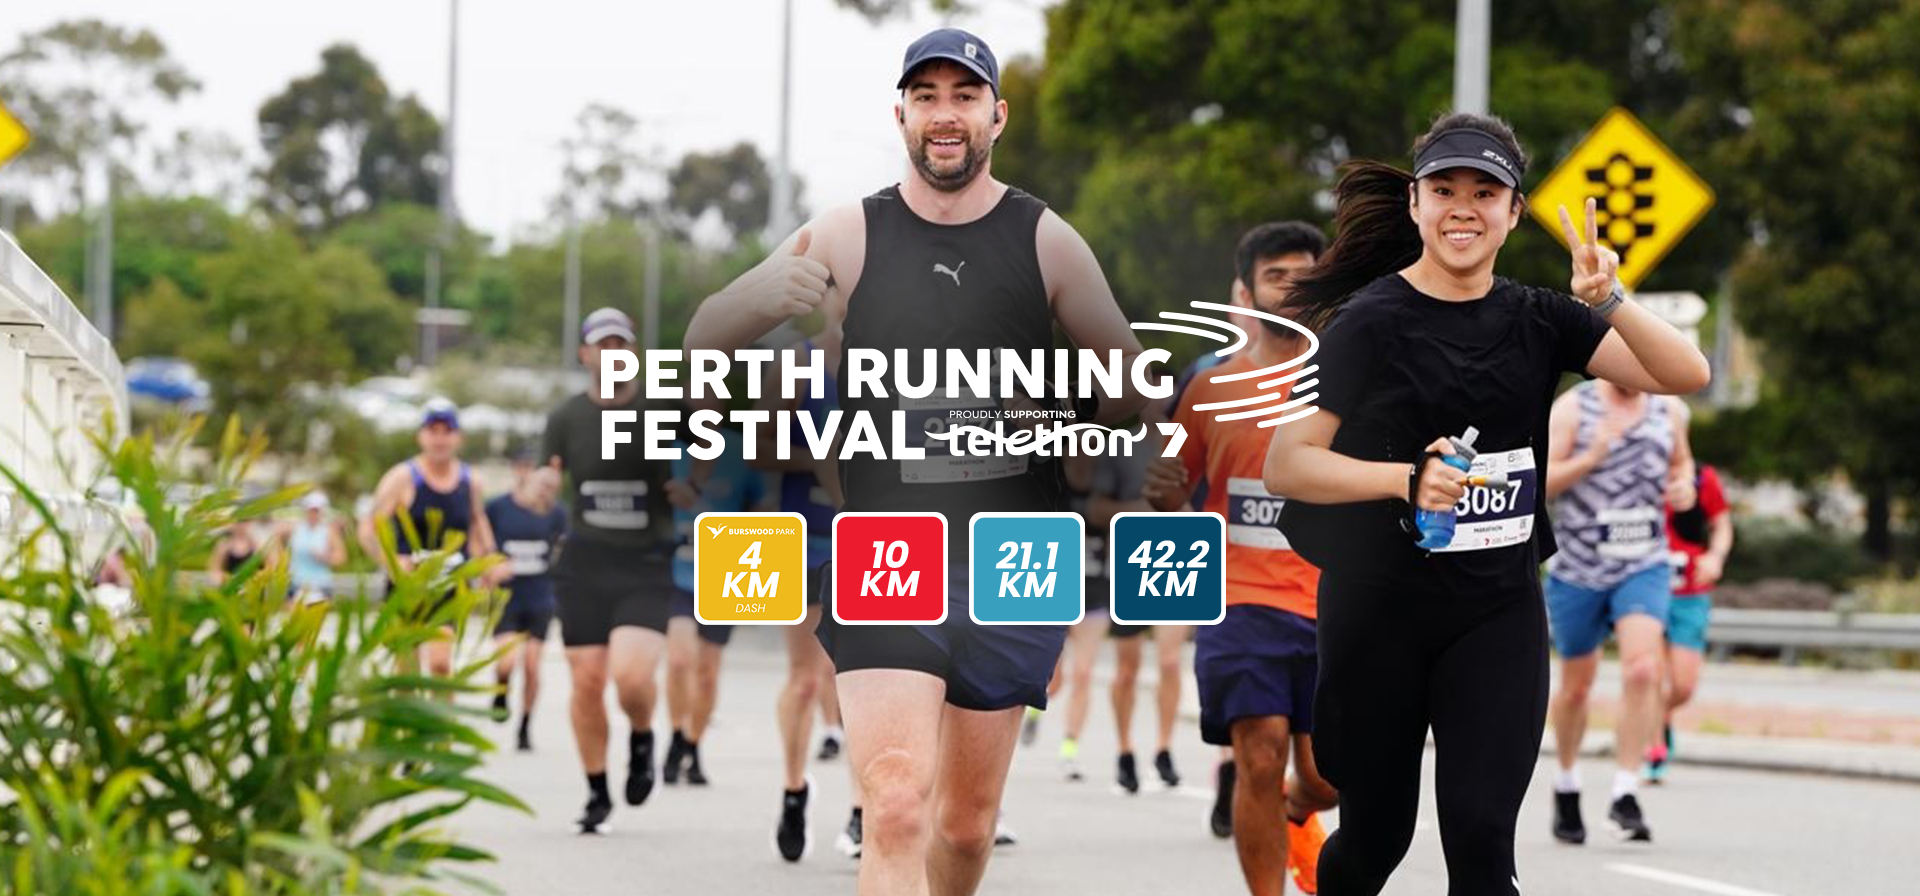 Event details for MARQUEE EVENT 45th Perth Marathon at Perth Running